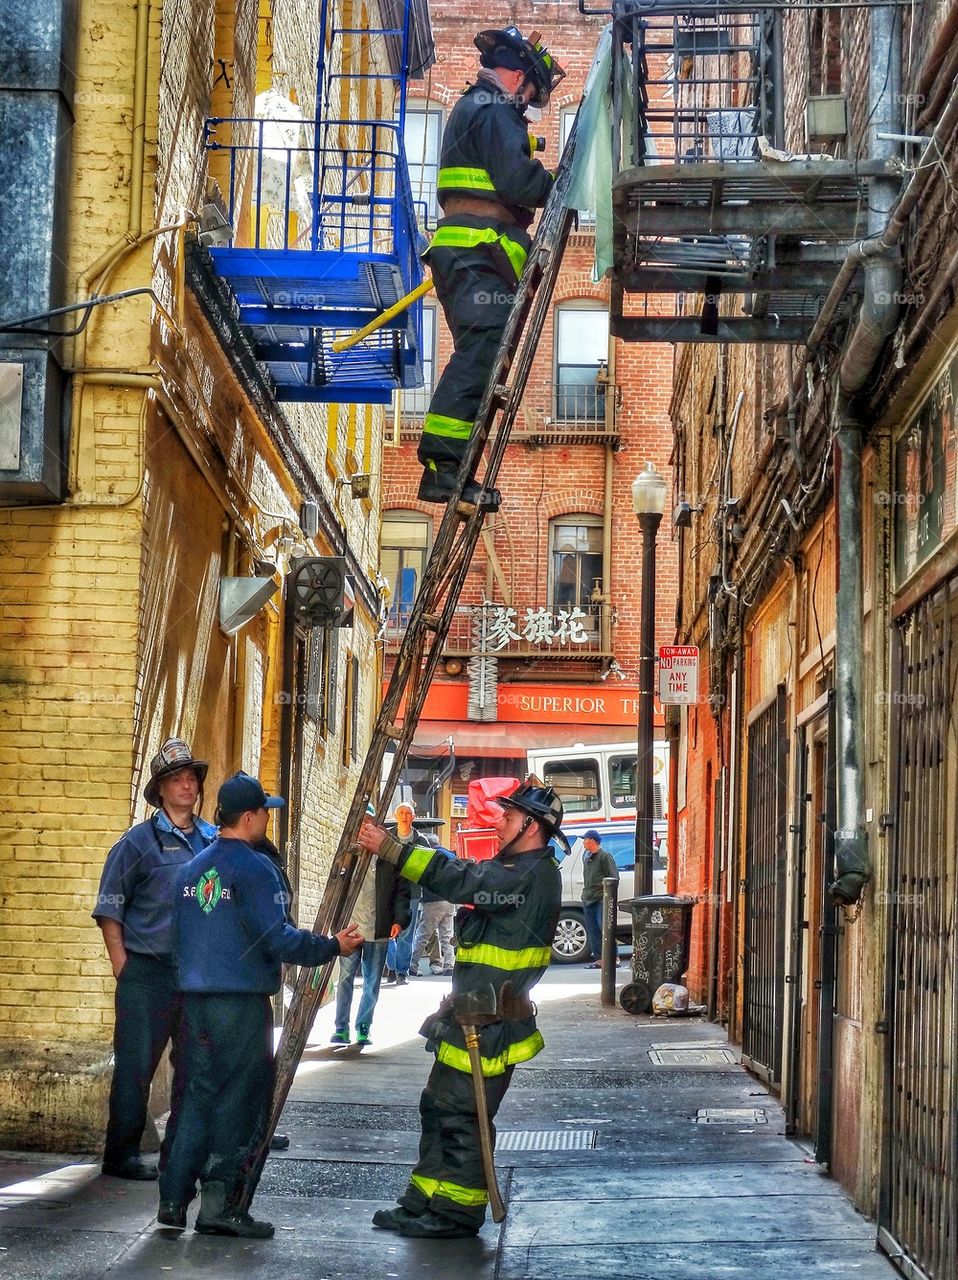 Firefighters In A City Alley. Firemen Scaling A Ladder Into A Highrise Apartment Building
